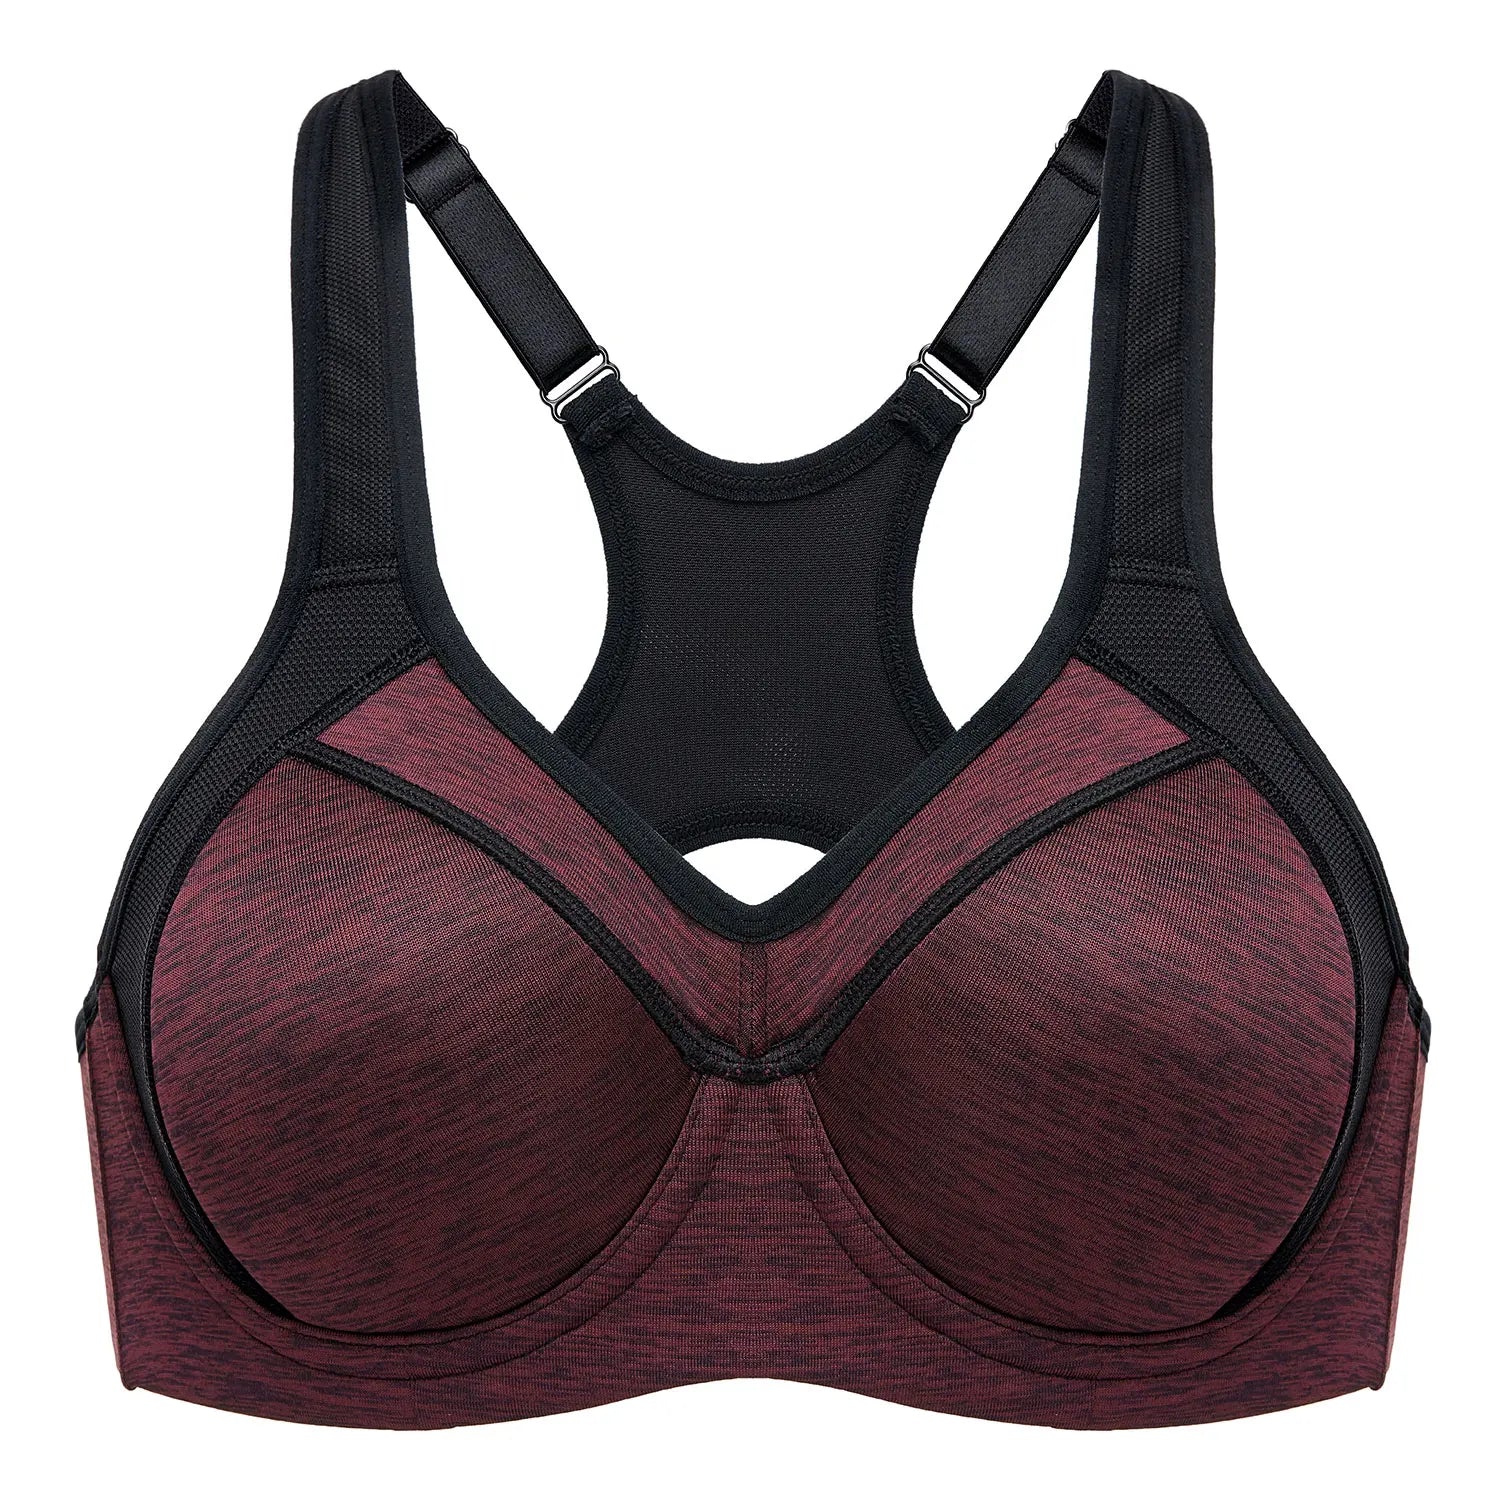 Canmol High Impact Racerback Push Up Sports Bra for Women Full Support